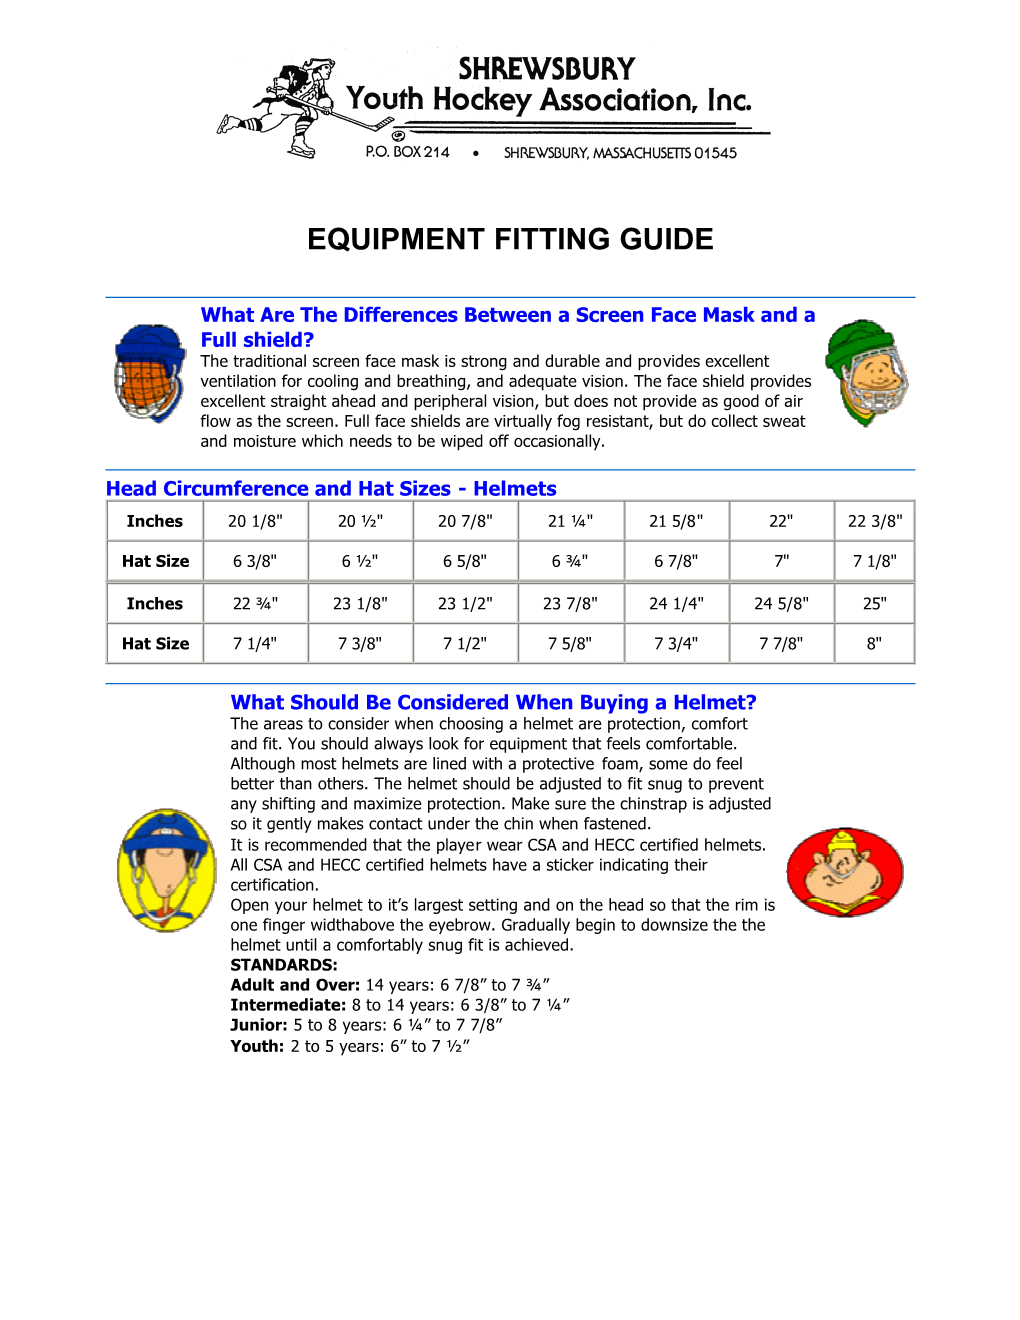 Equipment Fitting Guide